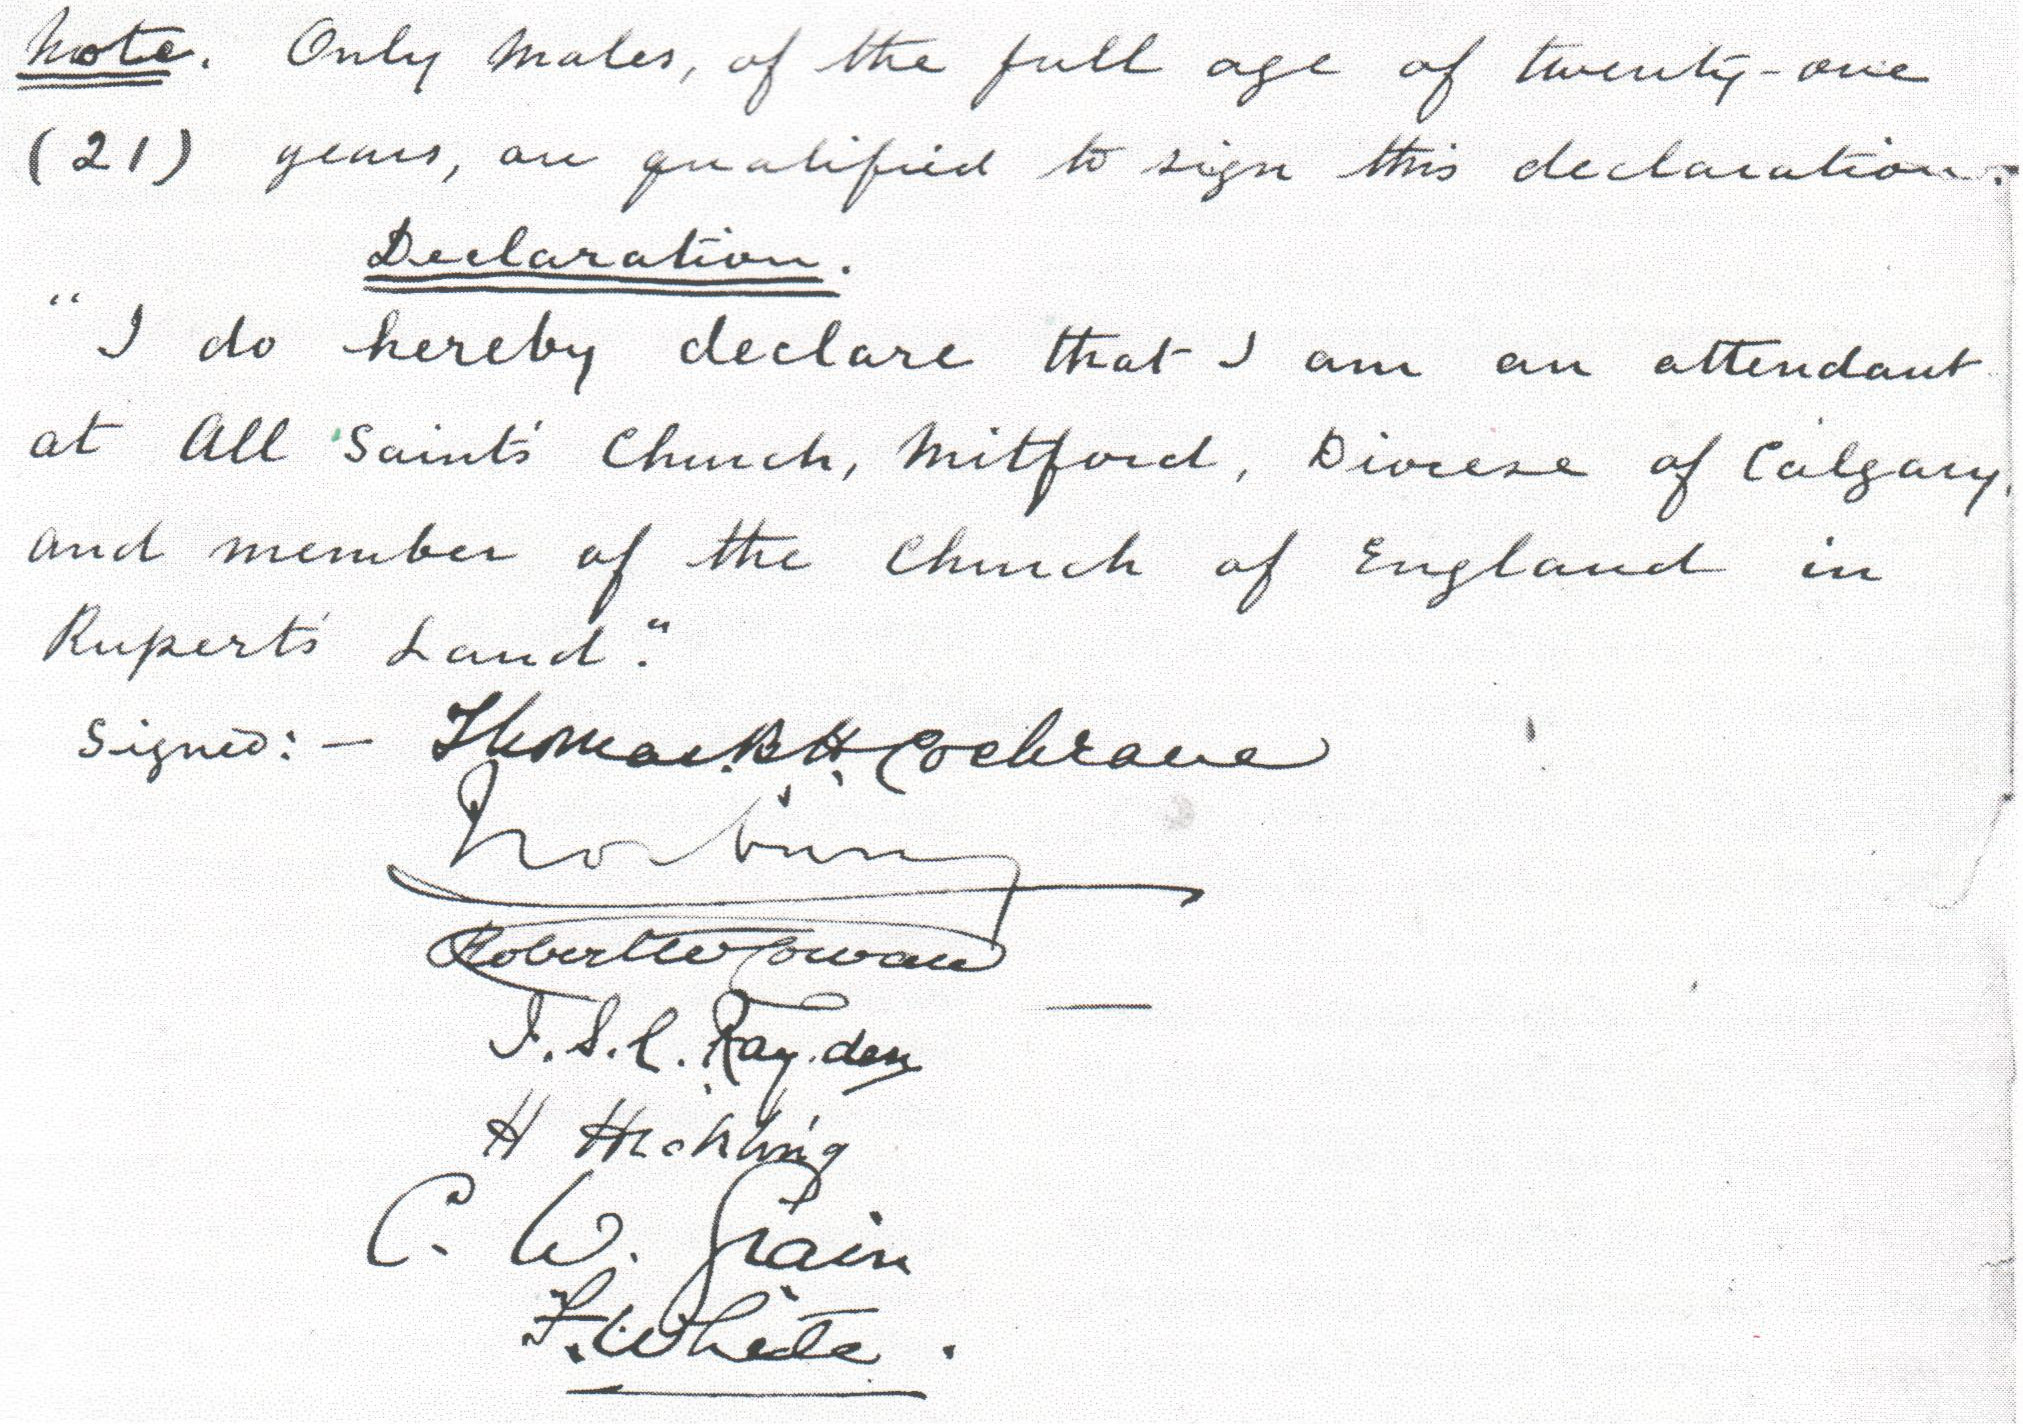 From the original Minute Book: Lady Adela notwithstanding, women were not allowed to sign as full members of the congregation.